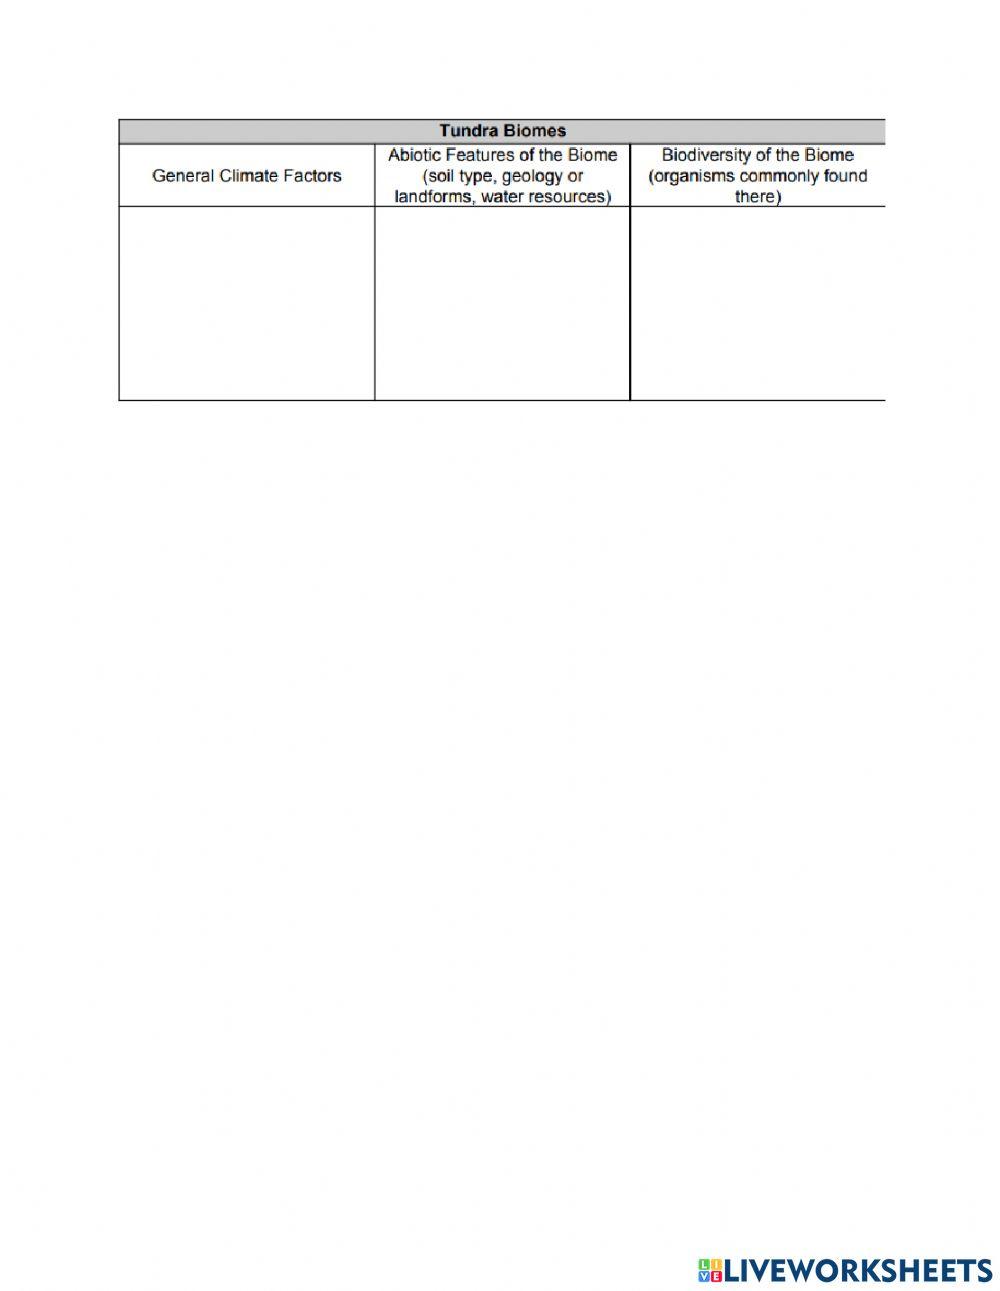 Ecosystem/Organism Research Project Organizer